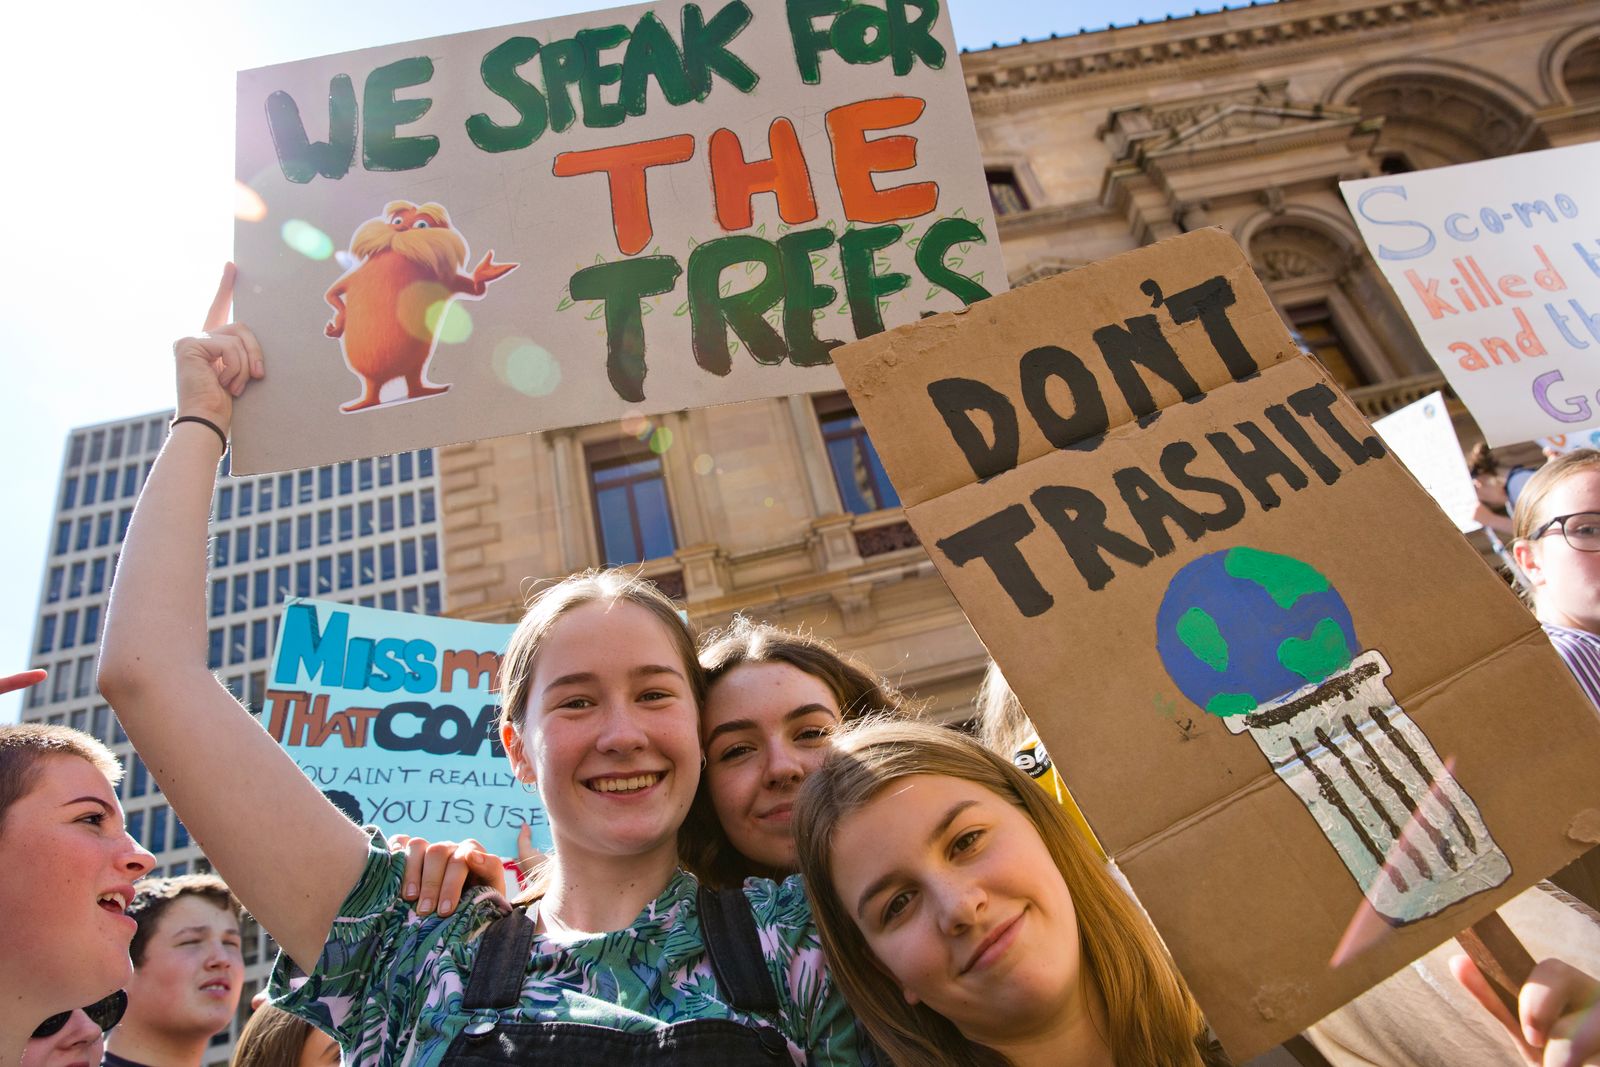 © MAYLEI HUNT - Schools Strike for Climate Change, Melbourne 2019